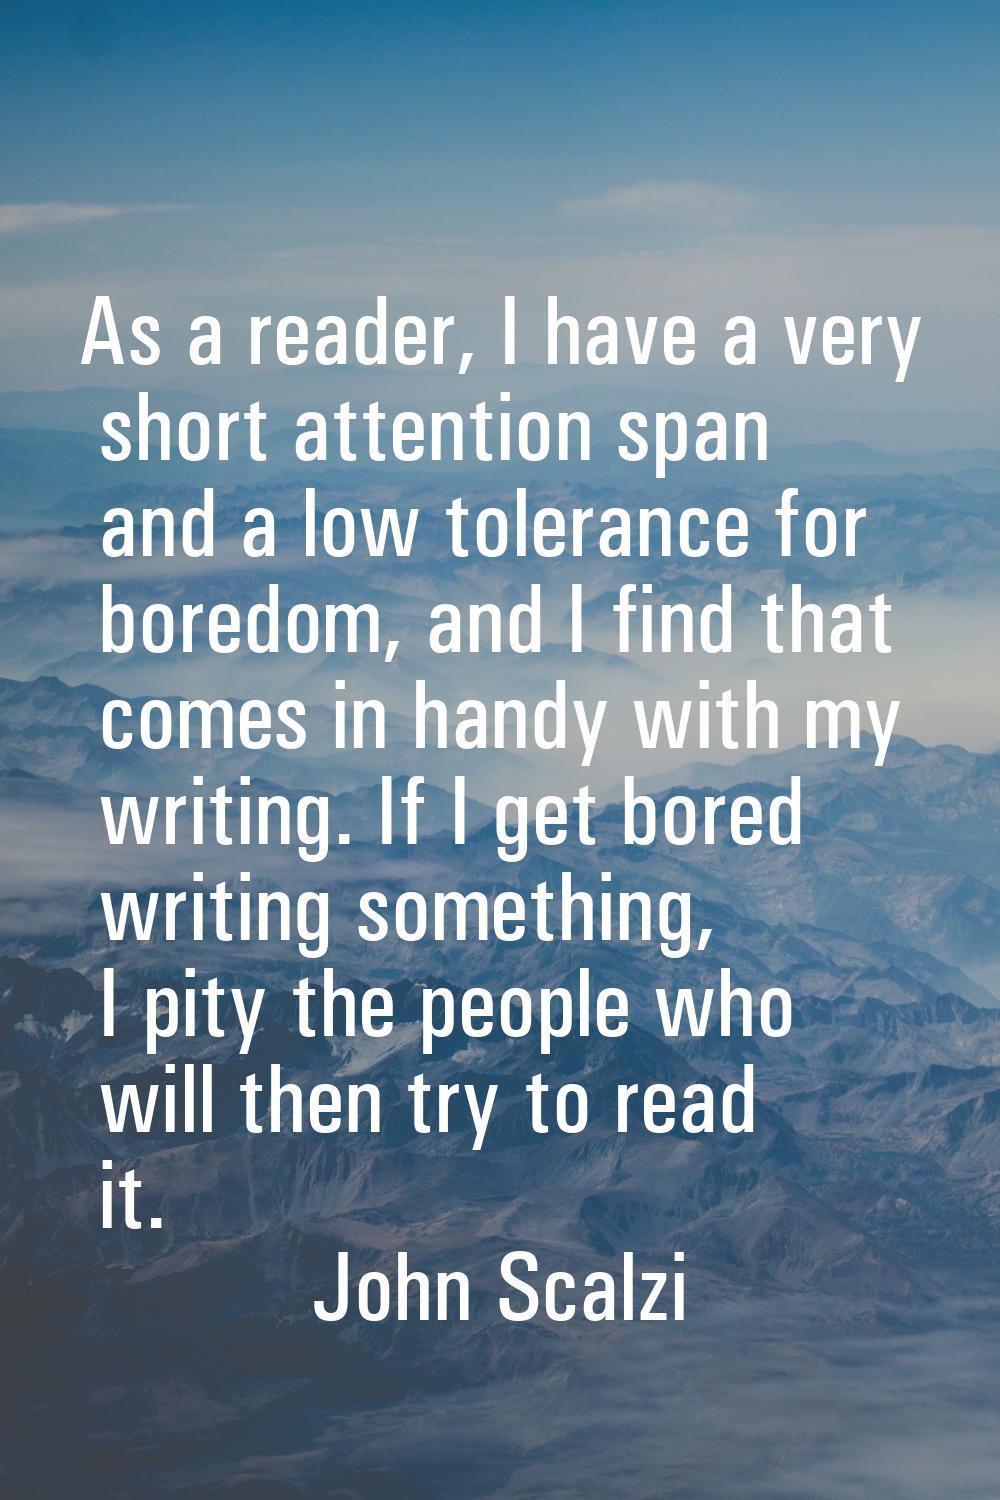 As a reader, I have a very short attention span and a low tolerance for boredom, and I find that co